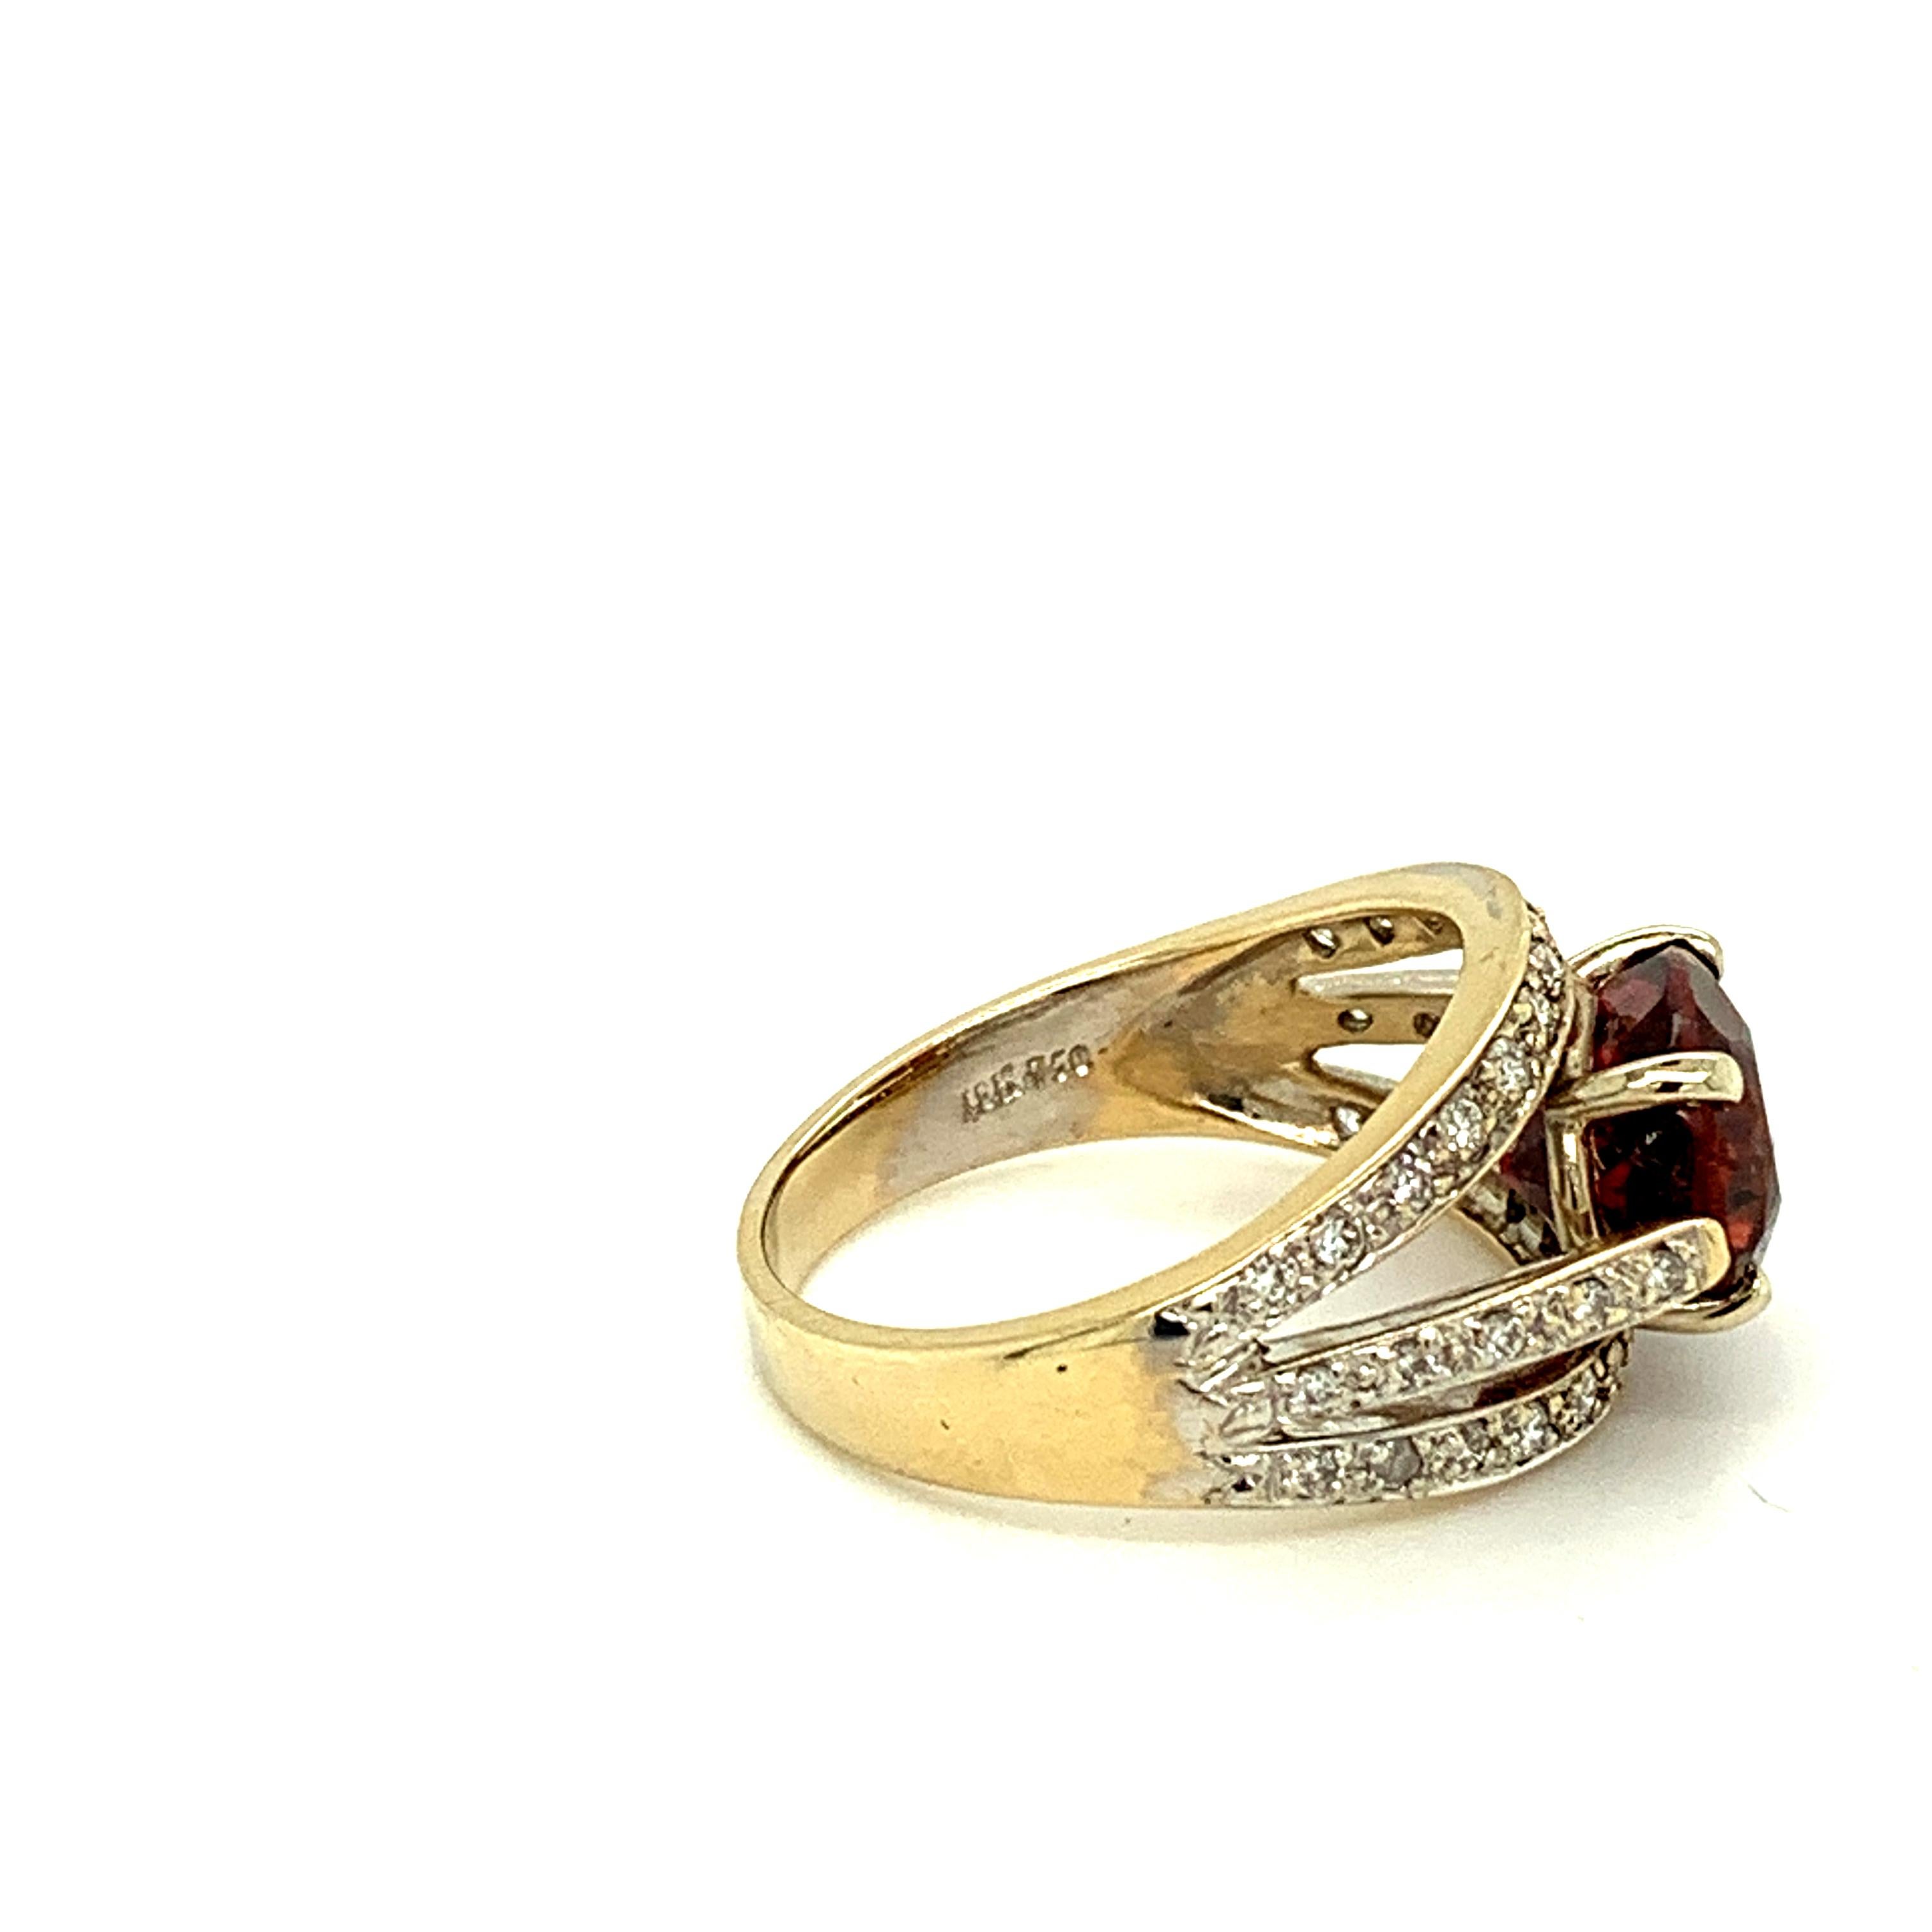 2.98ct Raspberry Rubellite Genuine Natural Tourmaline Ring (#J207)
18k yellow gold ring featuring a very deep raspberry color rubellite tourmaline weighing 2.98 carats. The oval tourmaline measures 10x7mm. The tourmaline is accented by round